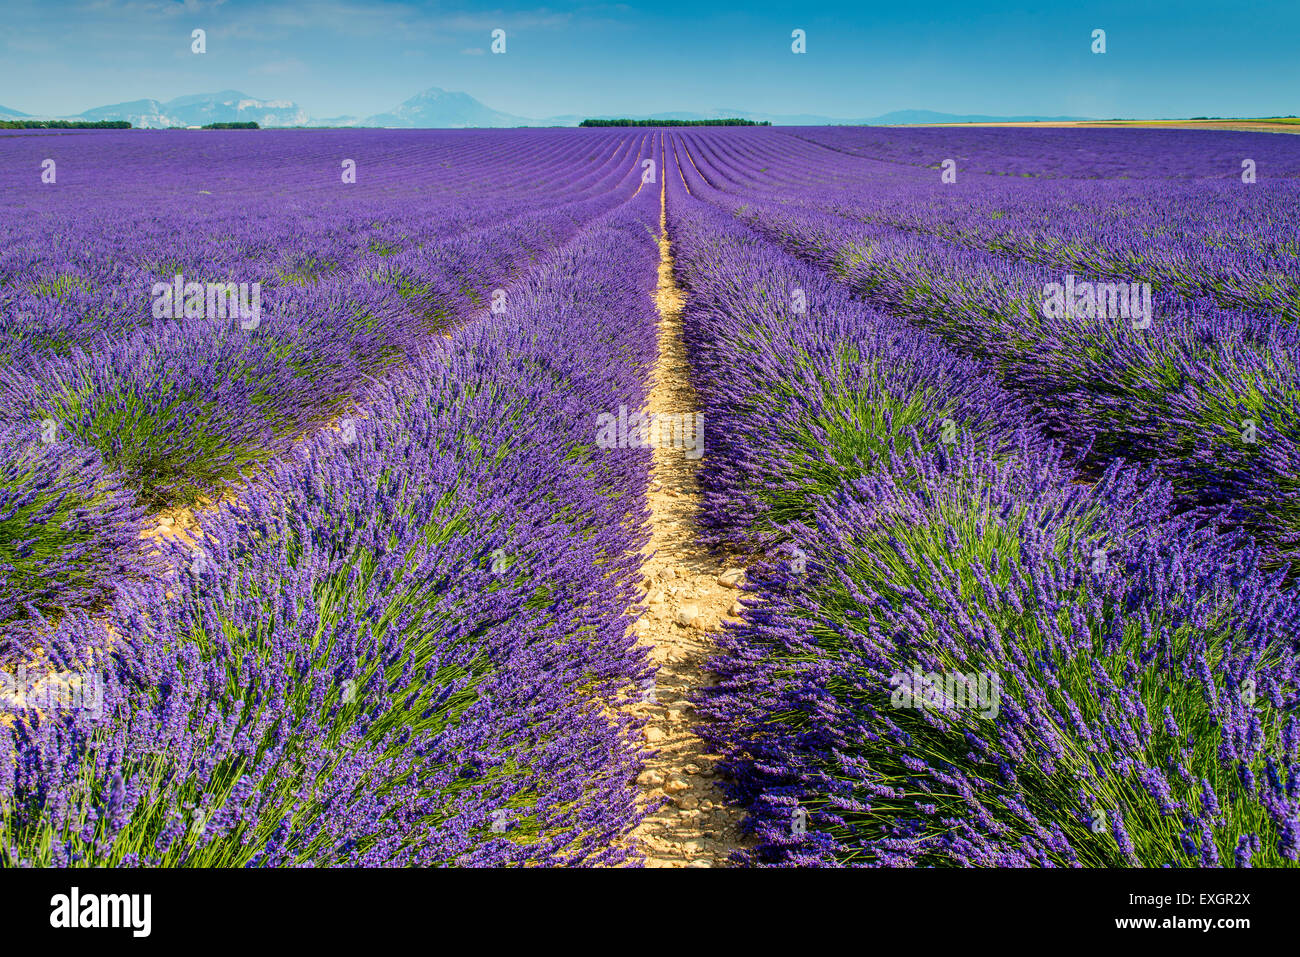 Lavender field in bloom at Plateau de Valensole, Provence, France Stock Photo